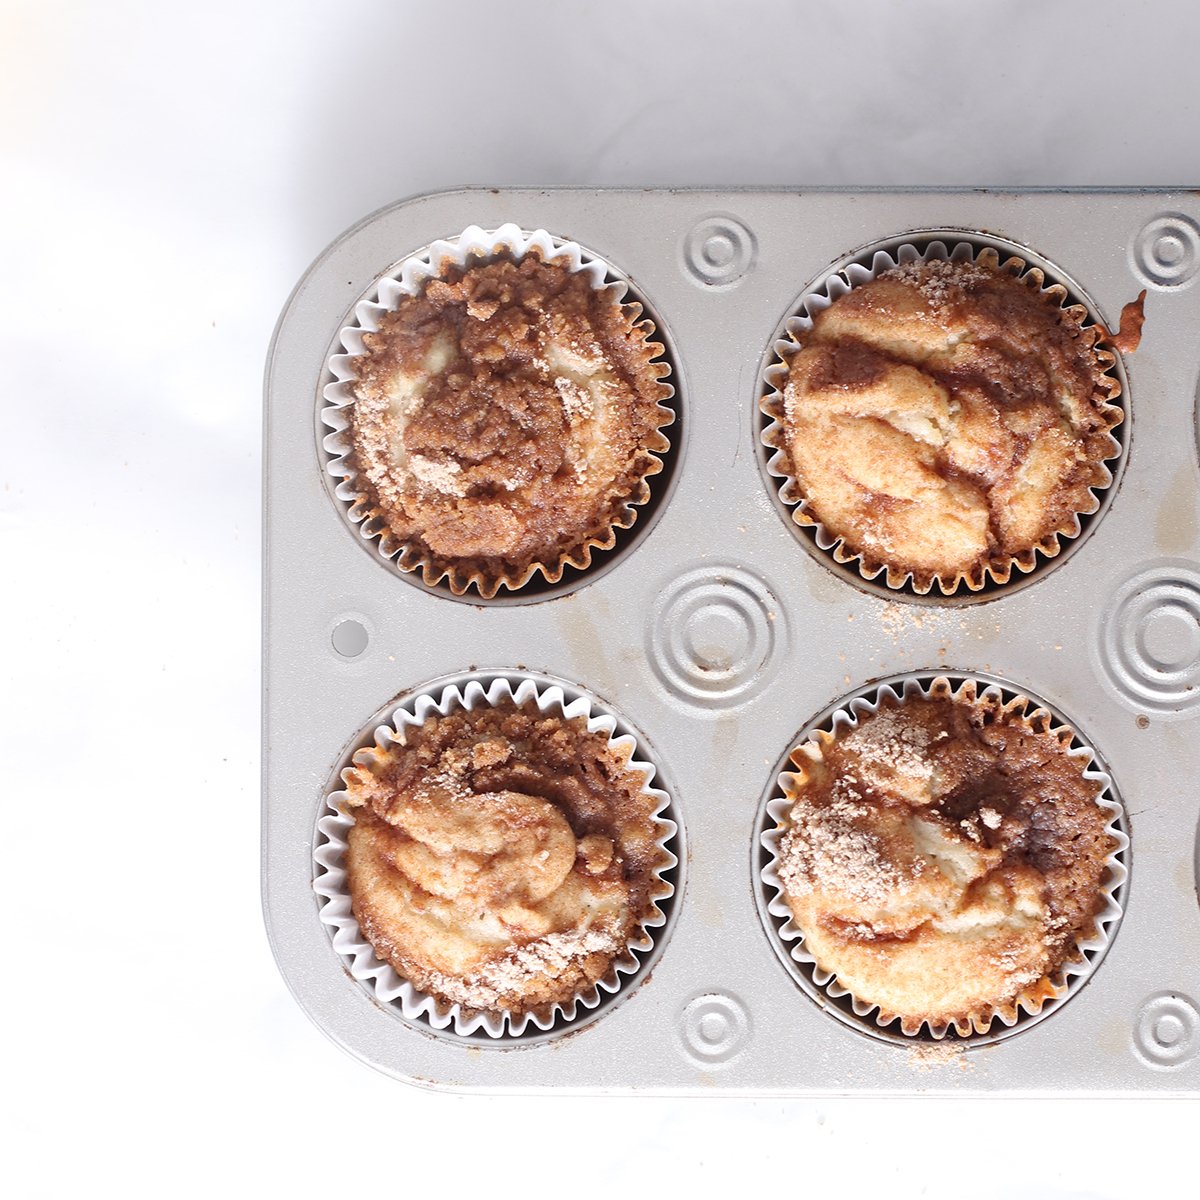 baked banana muffins in a pan.